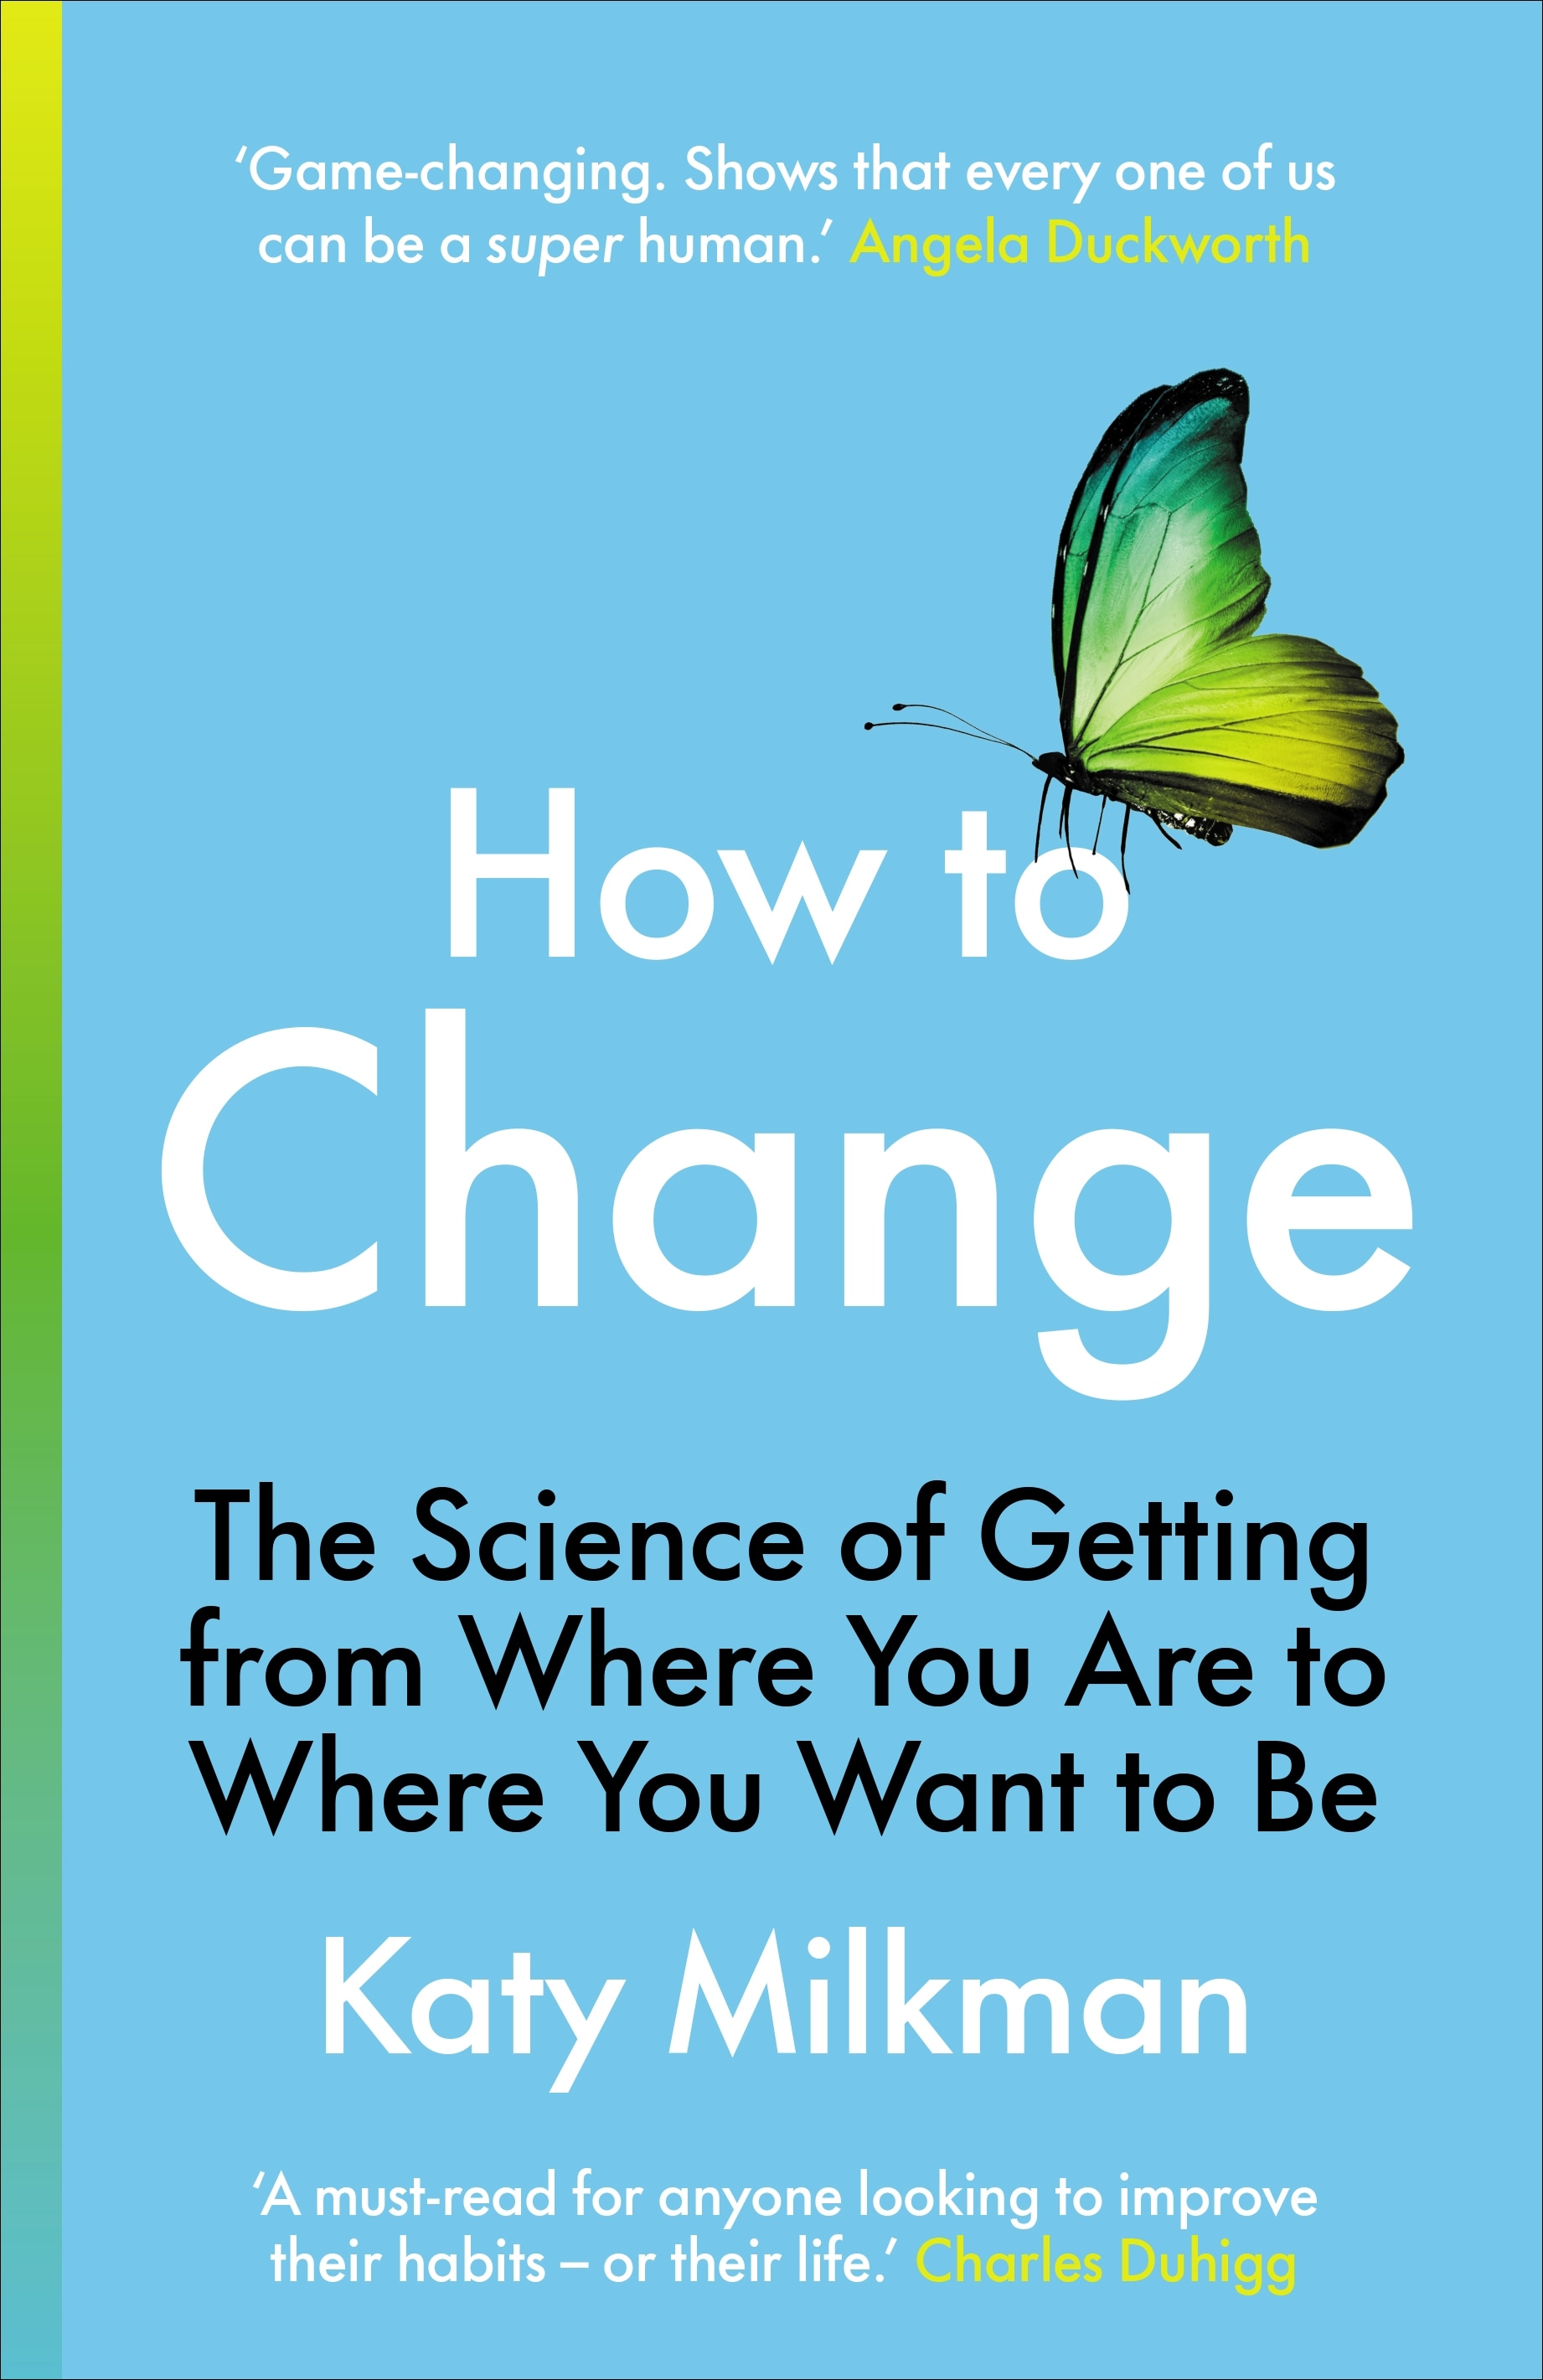 Book “How to Change” by Katy Milkman — May 6, 2021